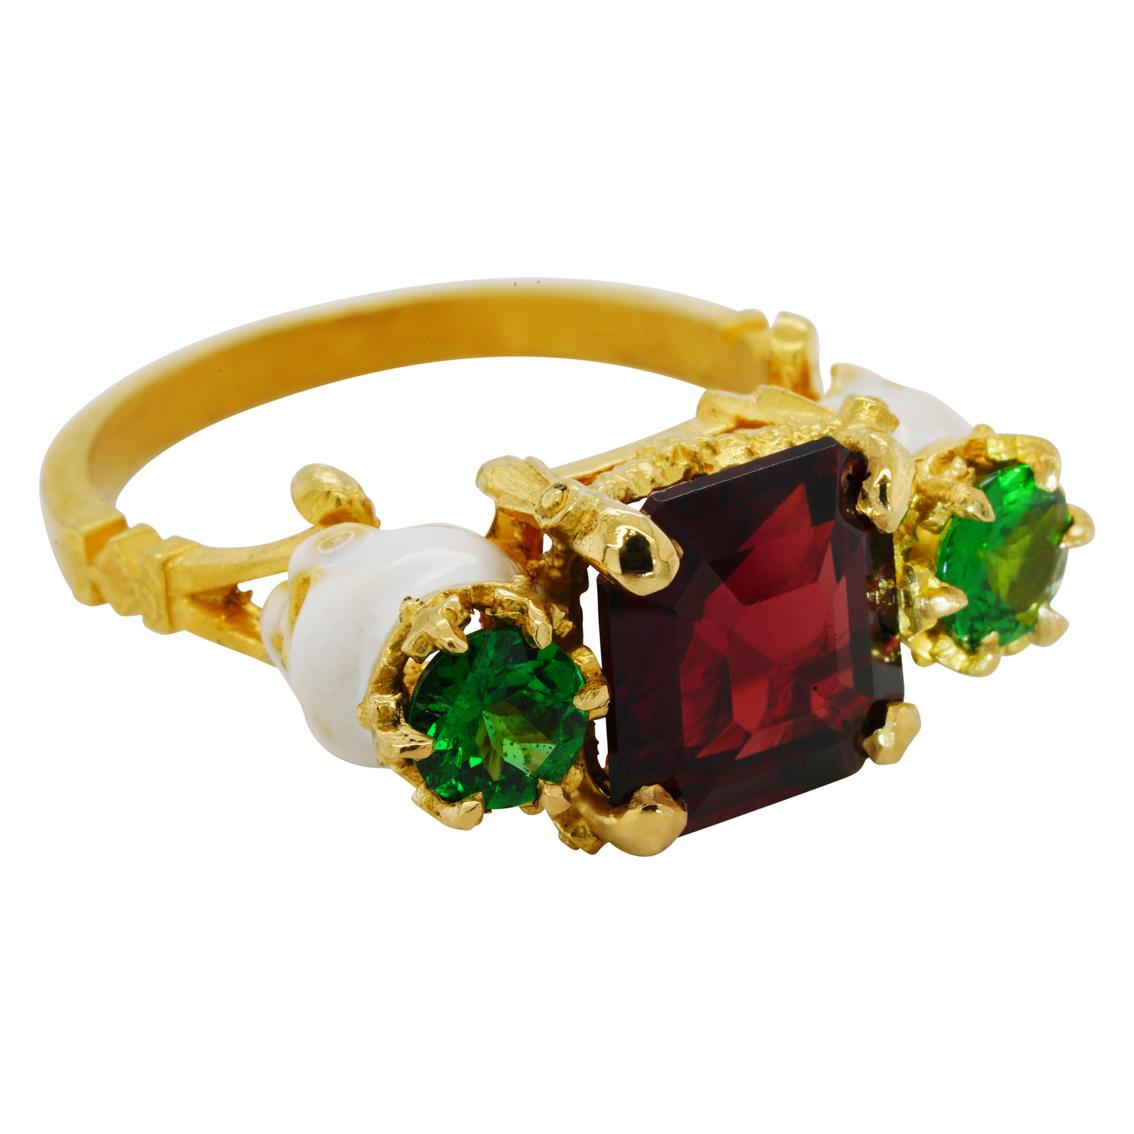 Catacomb Saints Garland Ring in 22 Karat Gold with Red and Tsavorite Garnets 4